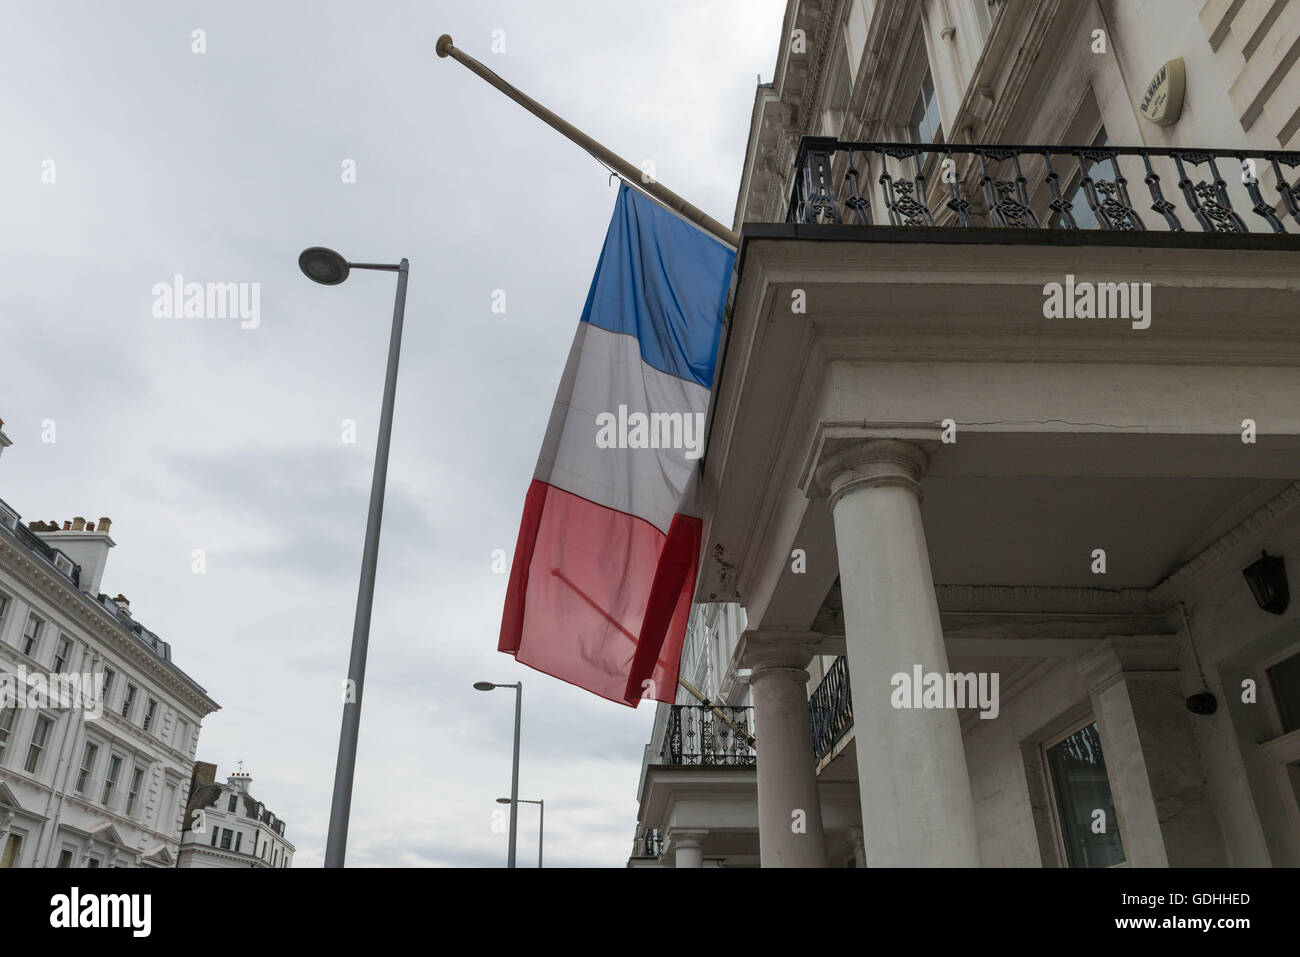 Londoners paying tributes outside London French Consulate after 84 was killed in France last night. 15th July, 2016. The French national flag is lowered at half-mast as three days of national mourning is declared for France. Fully armed Met Police officers patrolling the South Kensington area as London is staying on high alert following the attacks in Nice. © Velar Grant/ZUMA Wire/Alamy Live News Stock Photo